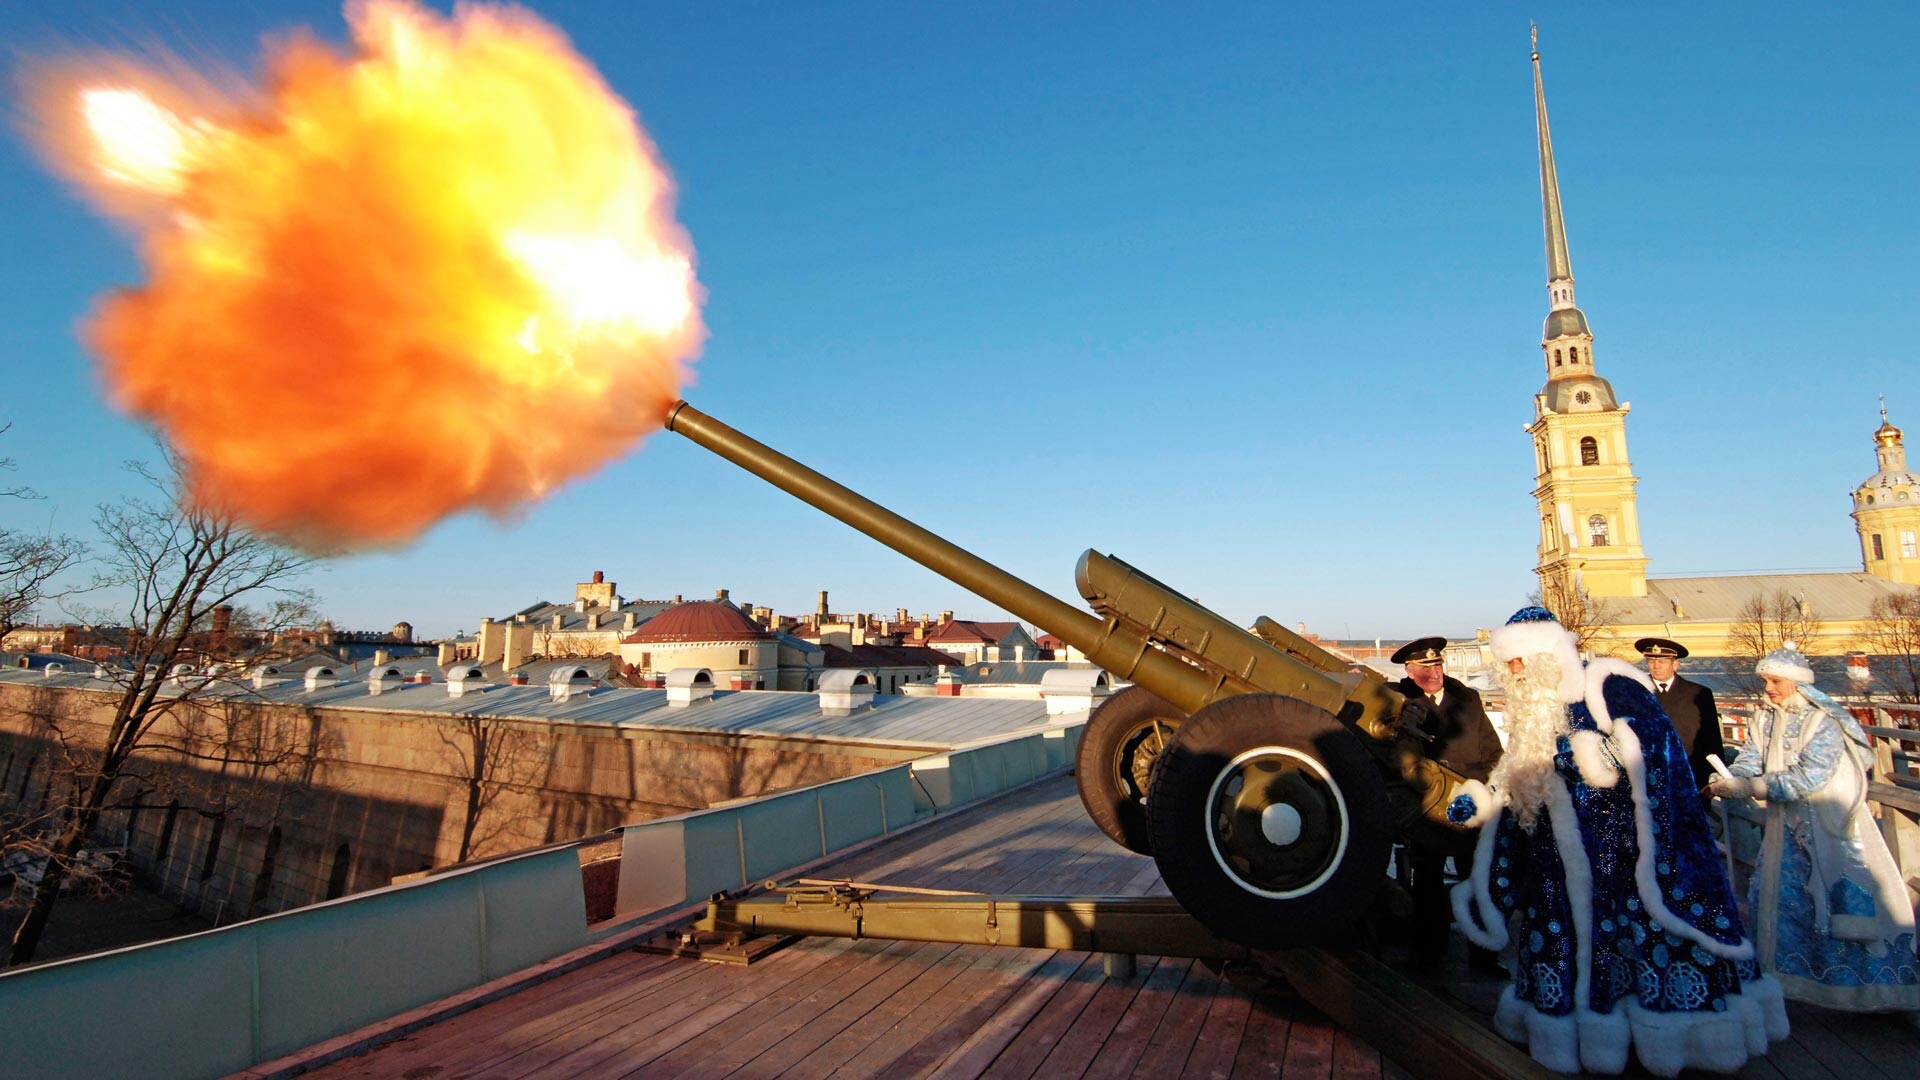 Father Frost firing the gun at the Peter and Paul Fortress